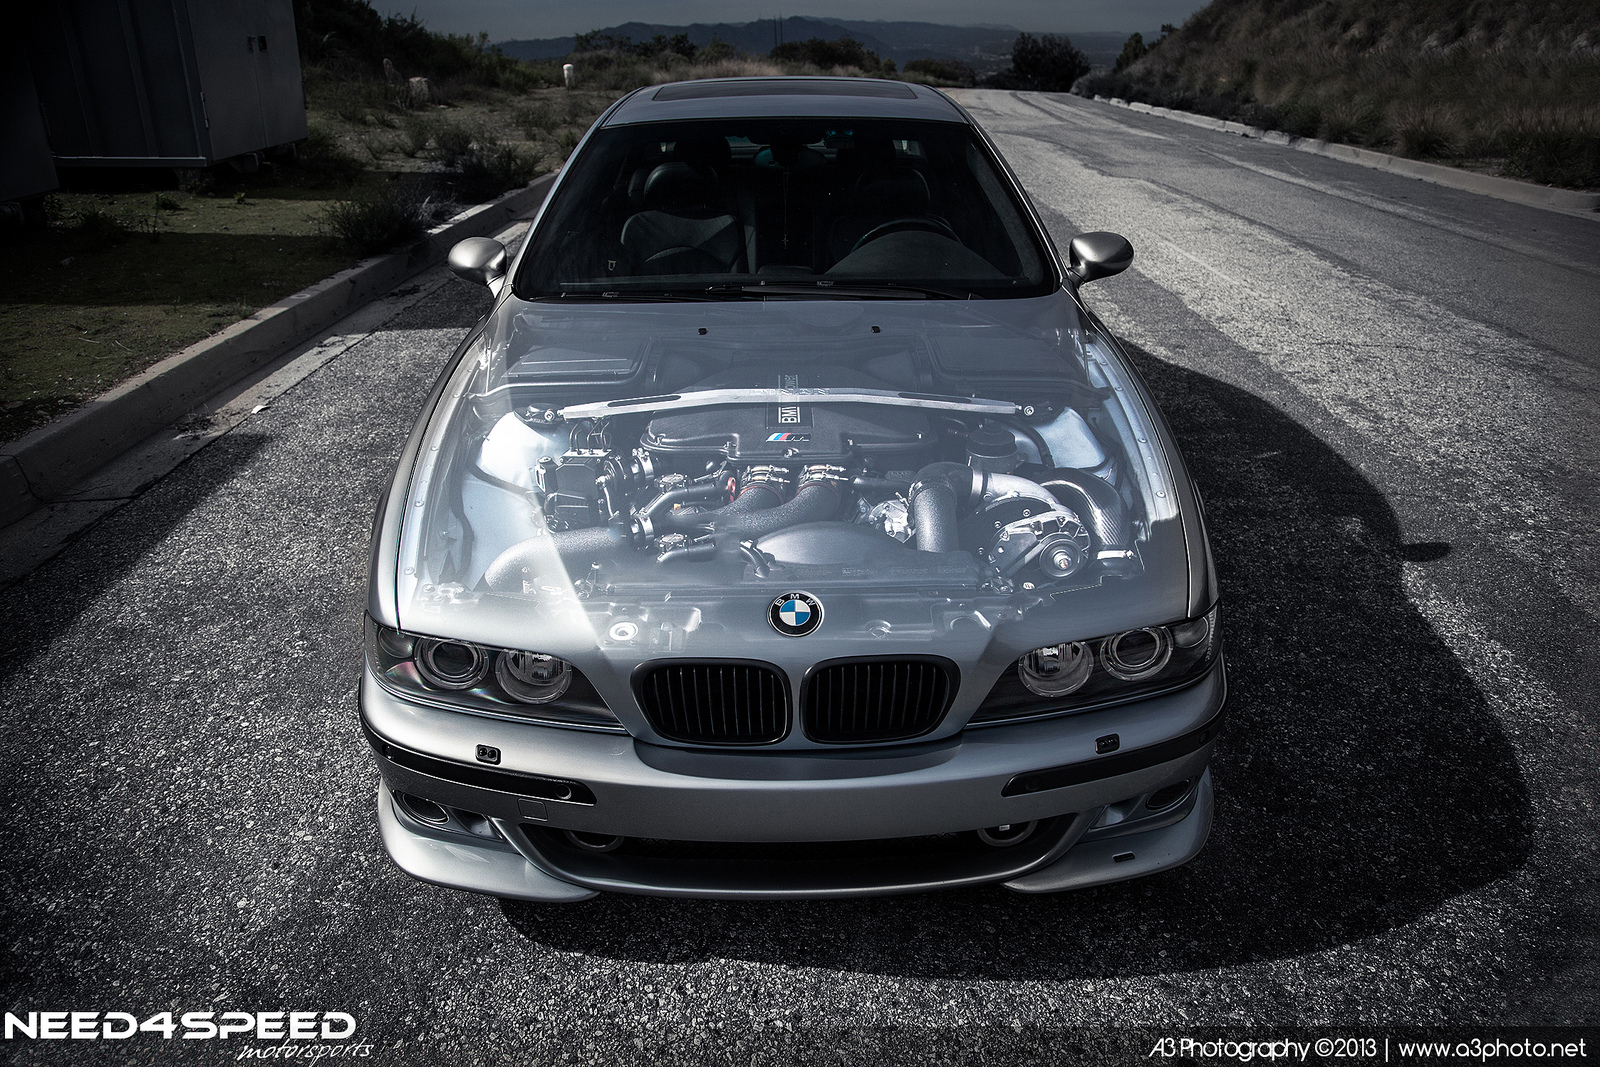 HQ Bmw E39 Wallpapers | File 1096.92Kb